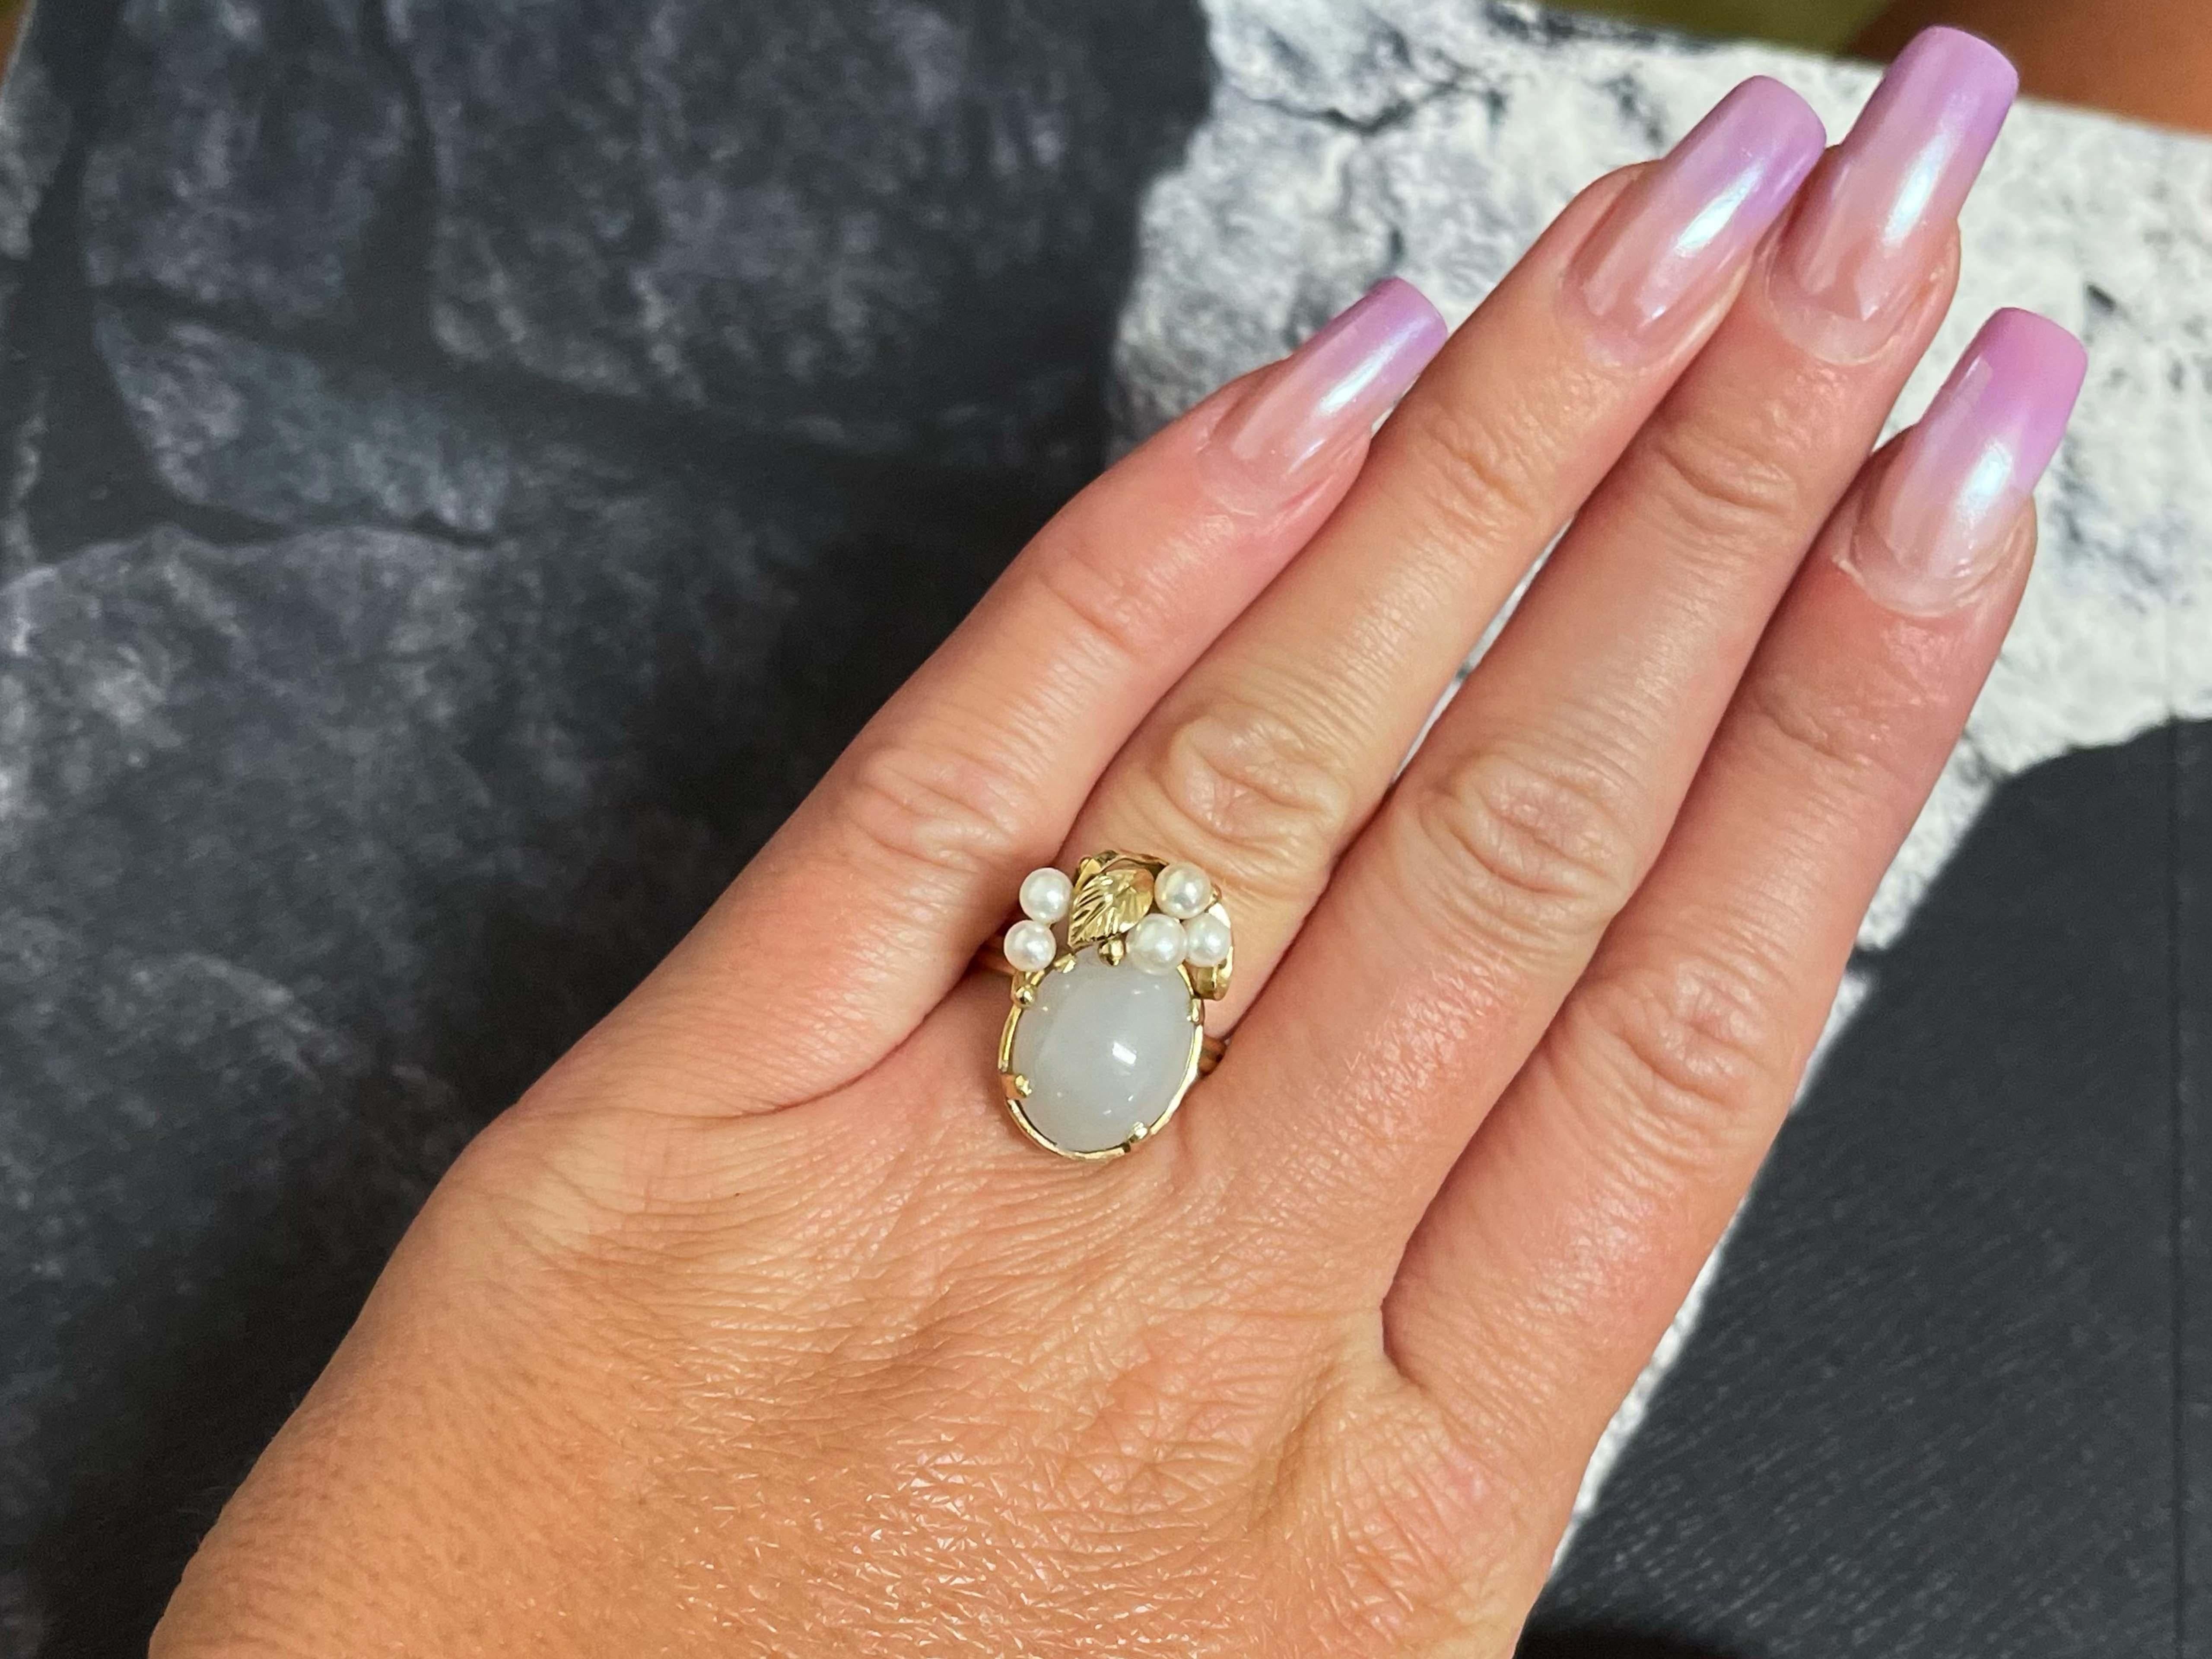 Ring Specifications:

Designer: Ming's

Stone: Akoya Pearl and Jade

Metal: 14k Yellow Gold

Total Weight: 5.4 Grams

Ring Size: 7 (resizable) please message us for resizing BEFORE purchasing

Stamped: 